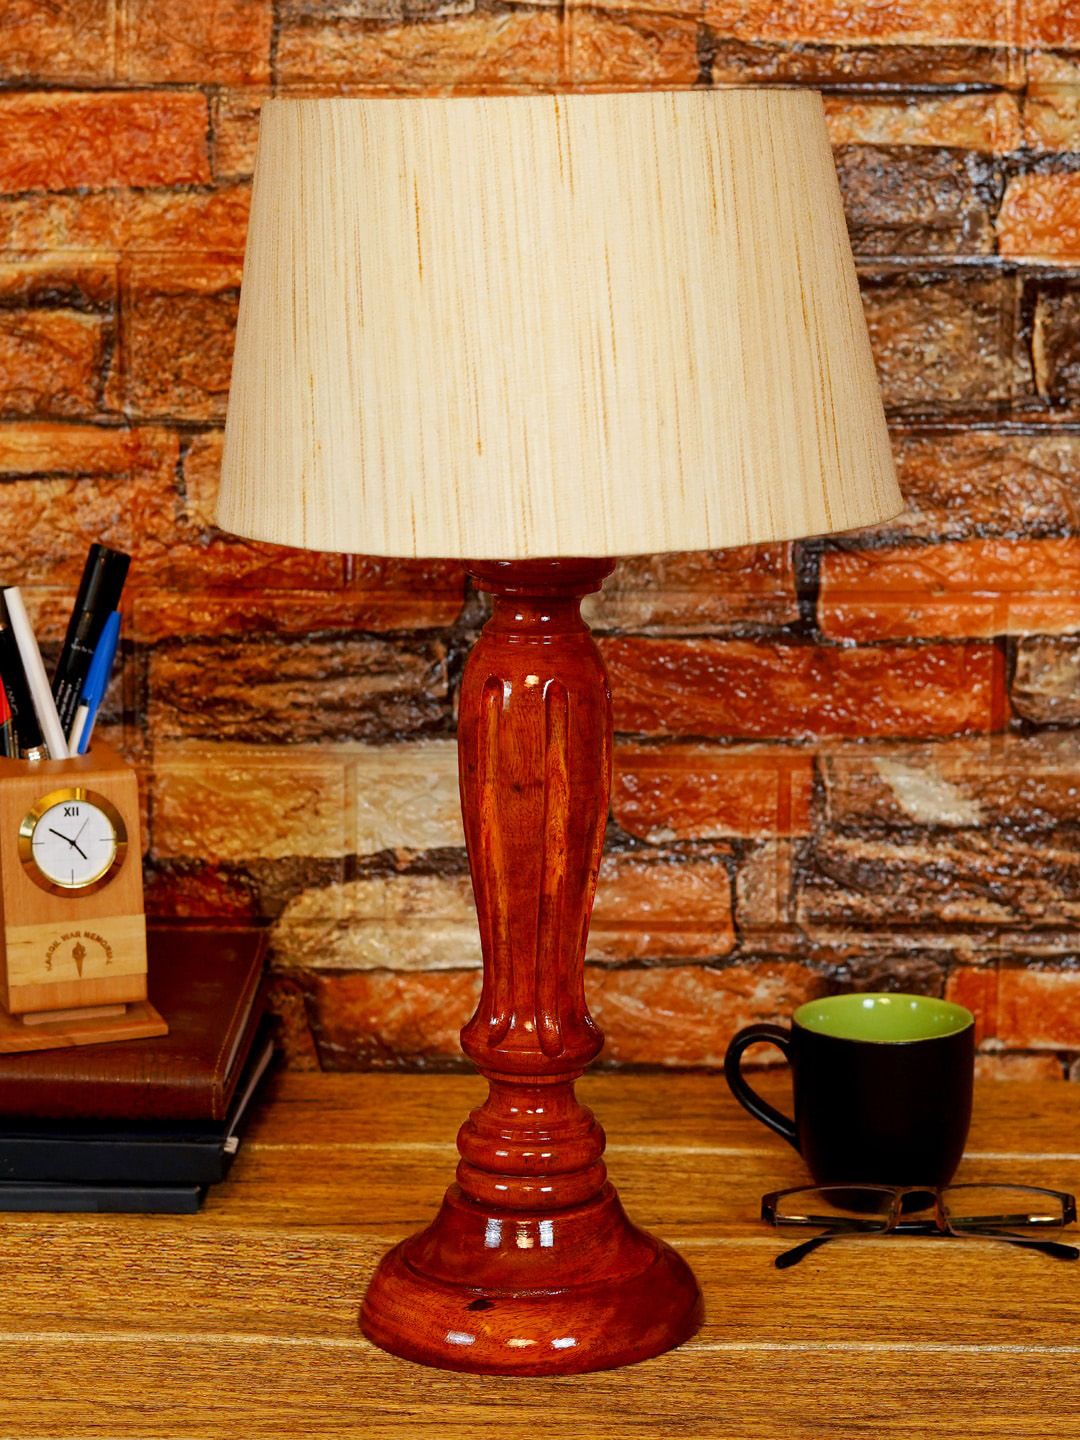 foziq Brown & Beige Textured Wooden Table Lamp Price in India